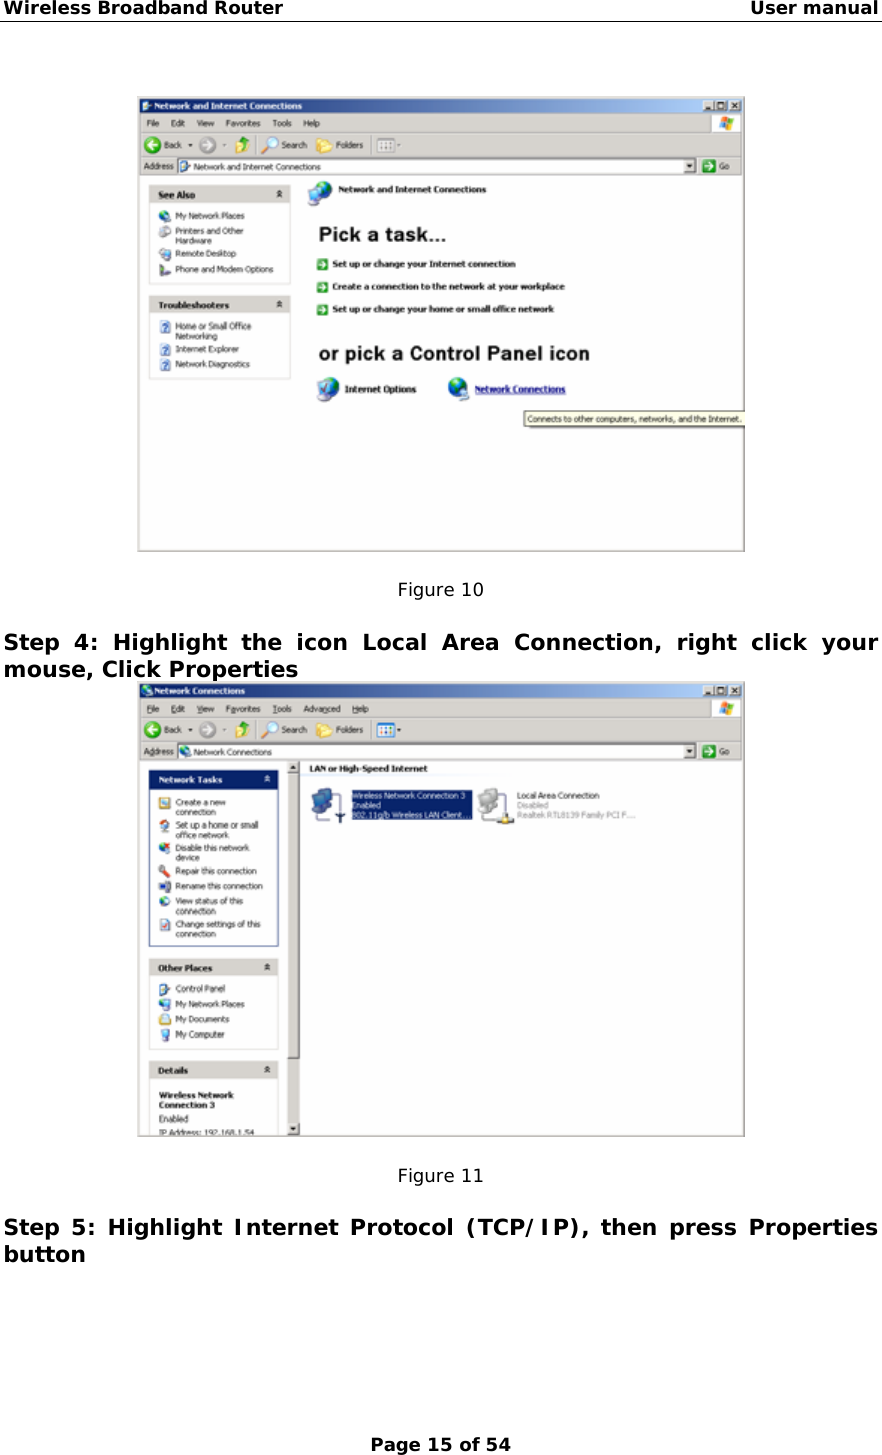 Wireless Broadband Router                                                   User manual Page 15 of 54    Figure 10  Step 4: Highlight the icon Local Area Connection, right click your mouse, Click Properties   Figure 11  Step 5: Highlight Internet Protocol (TCP/IP), then press Properties button   